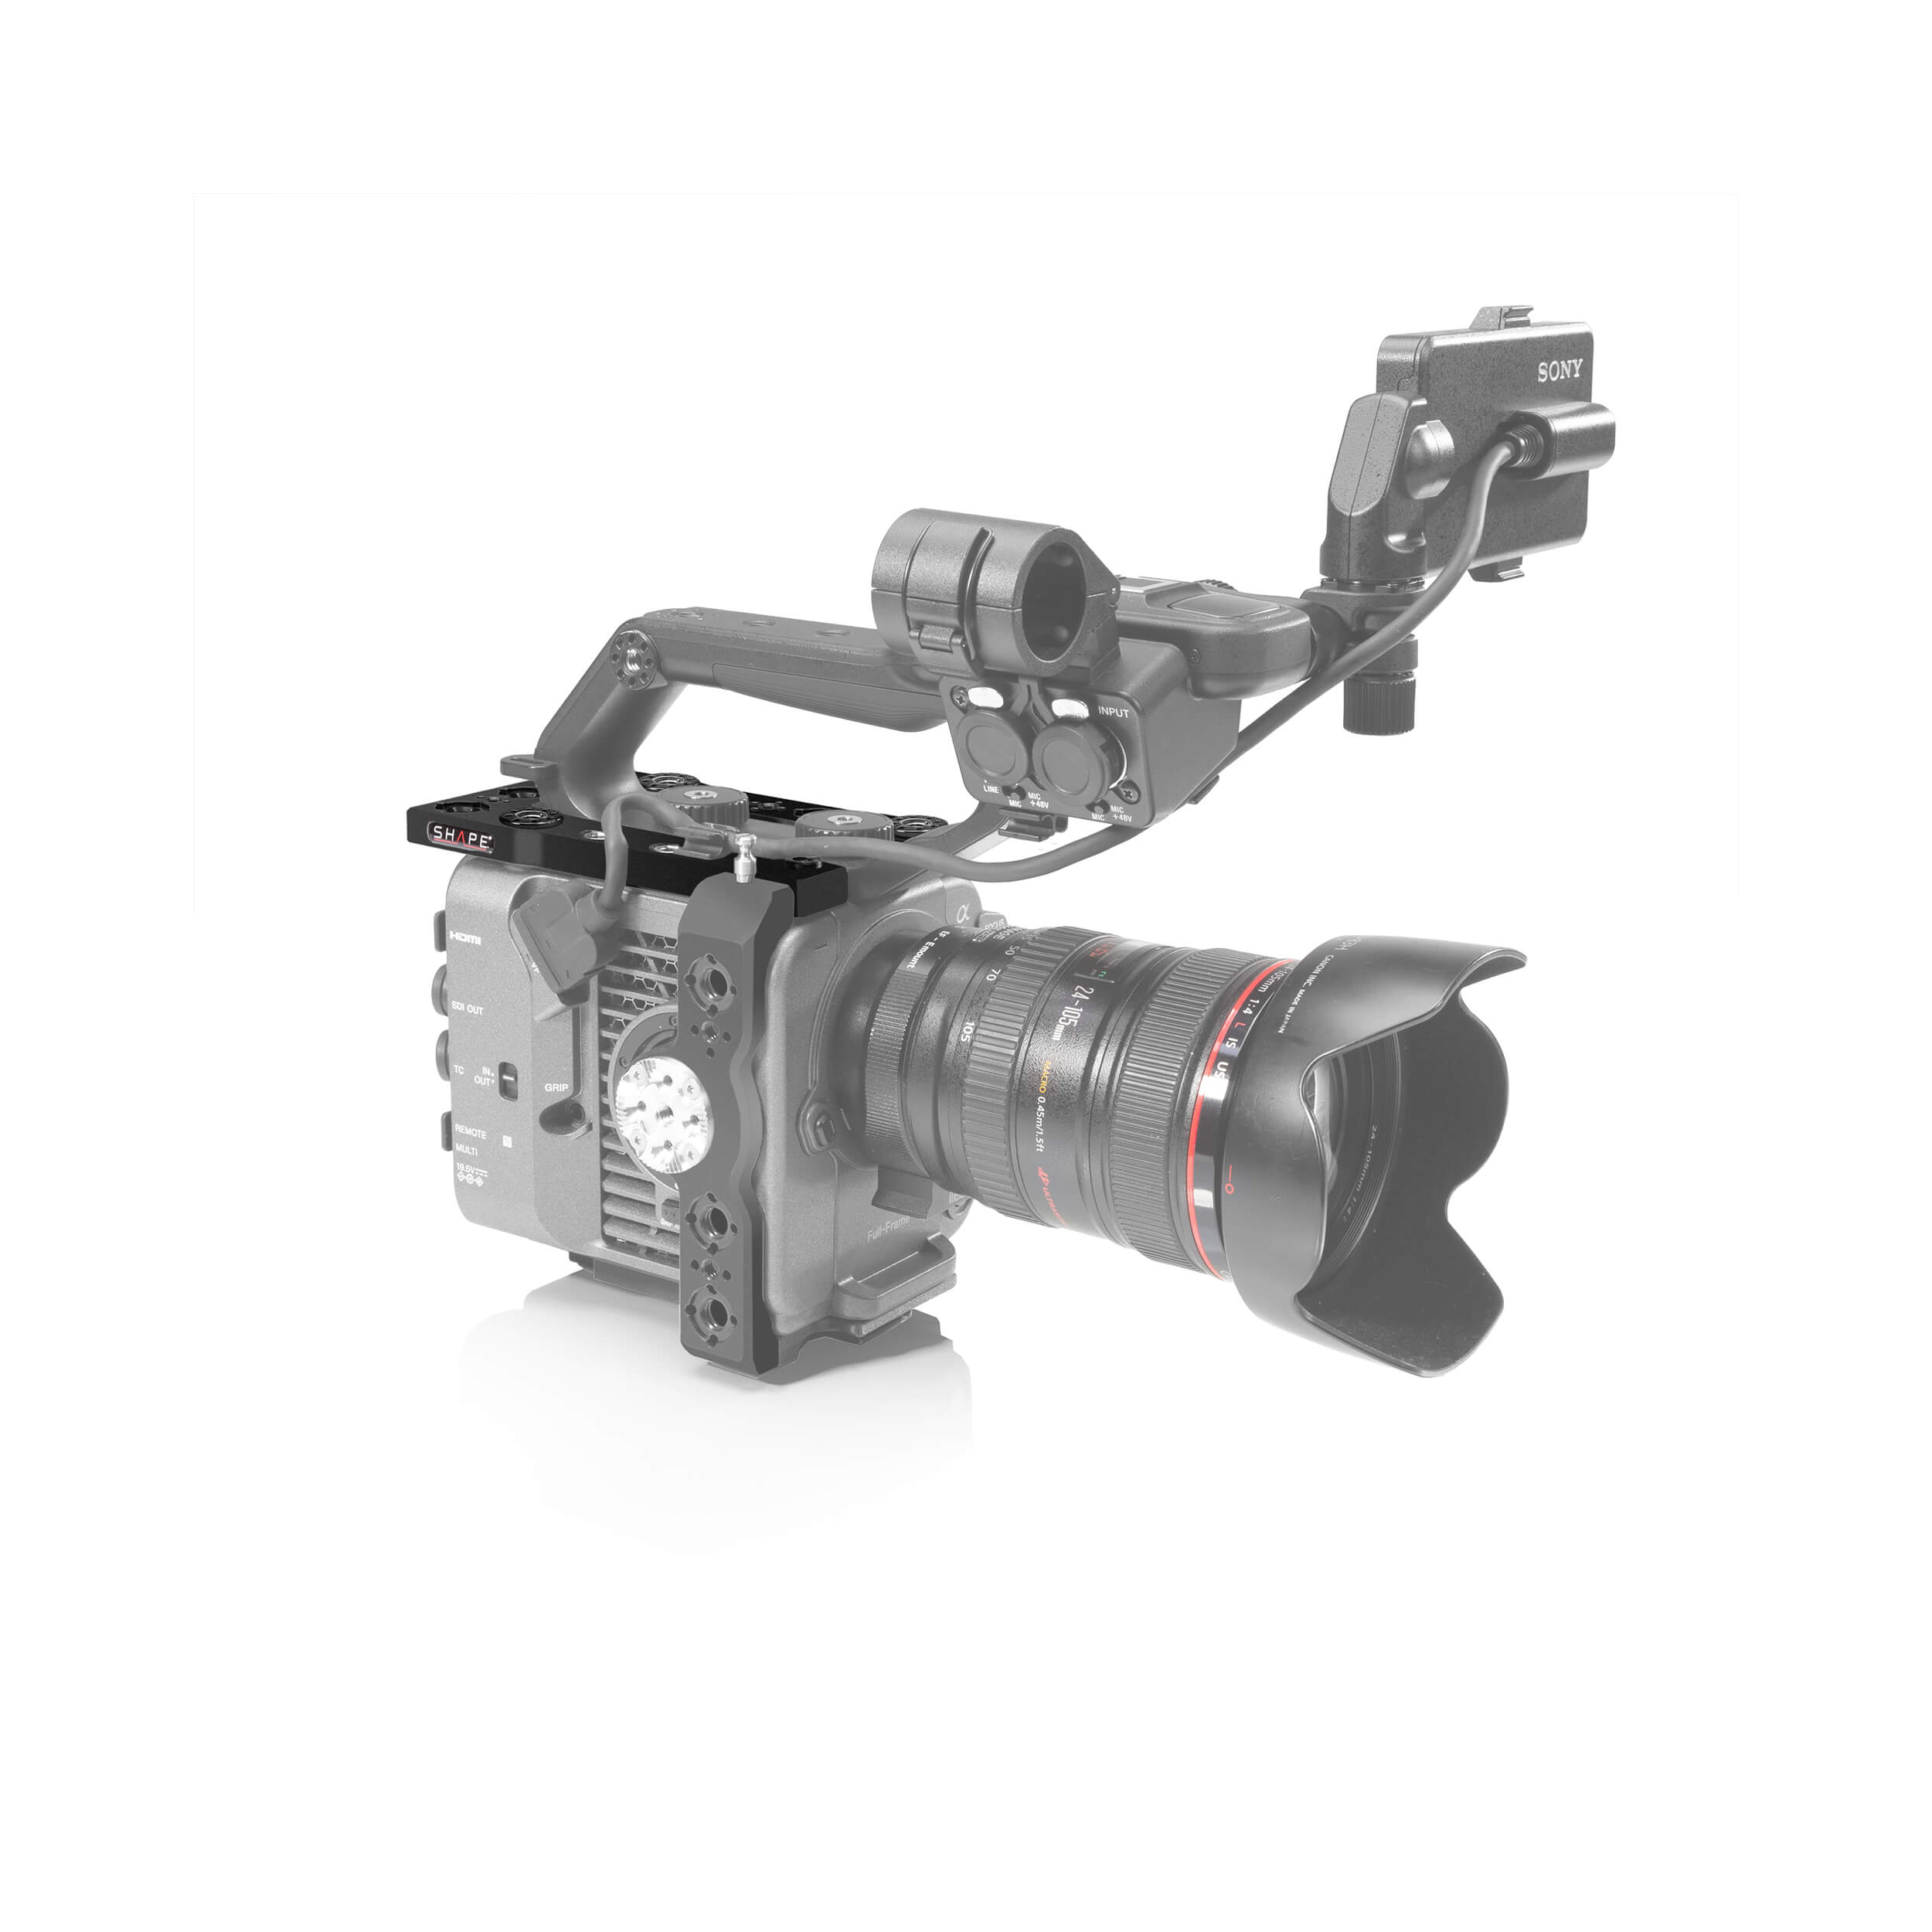 SHAPE Top Plate for Sony FX6